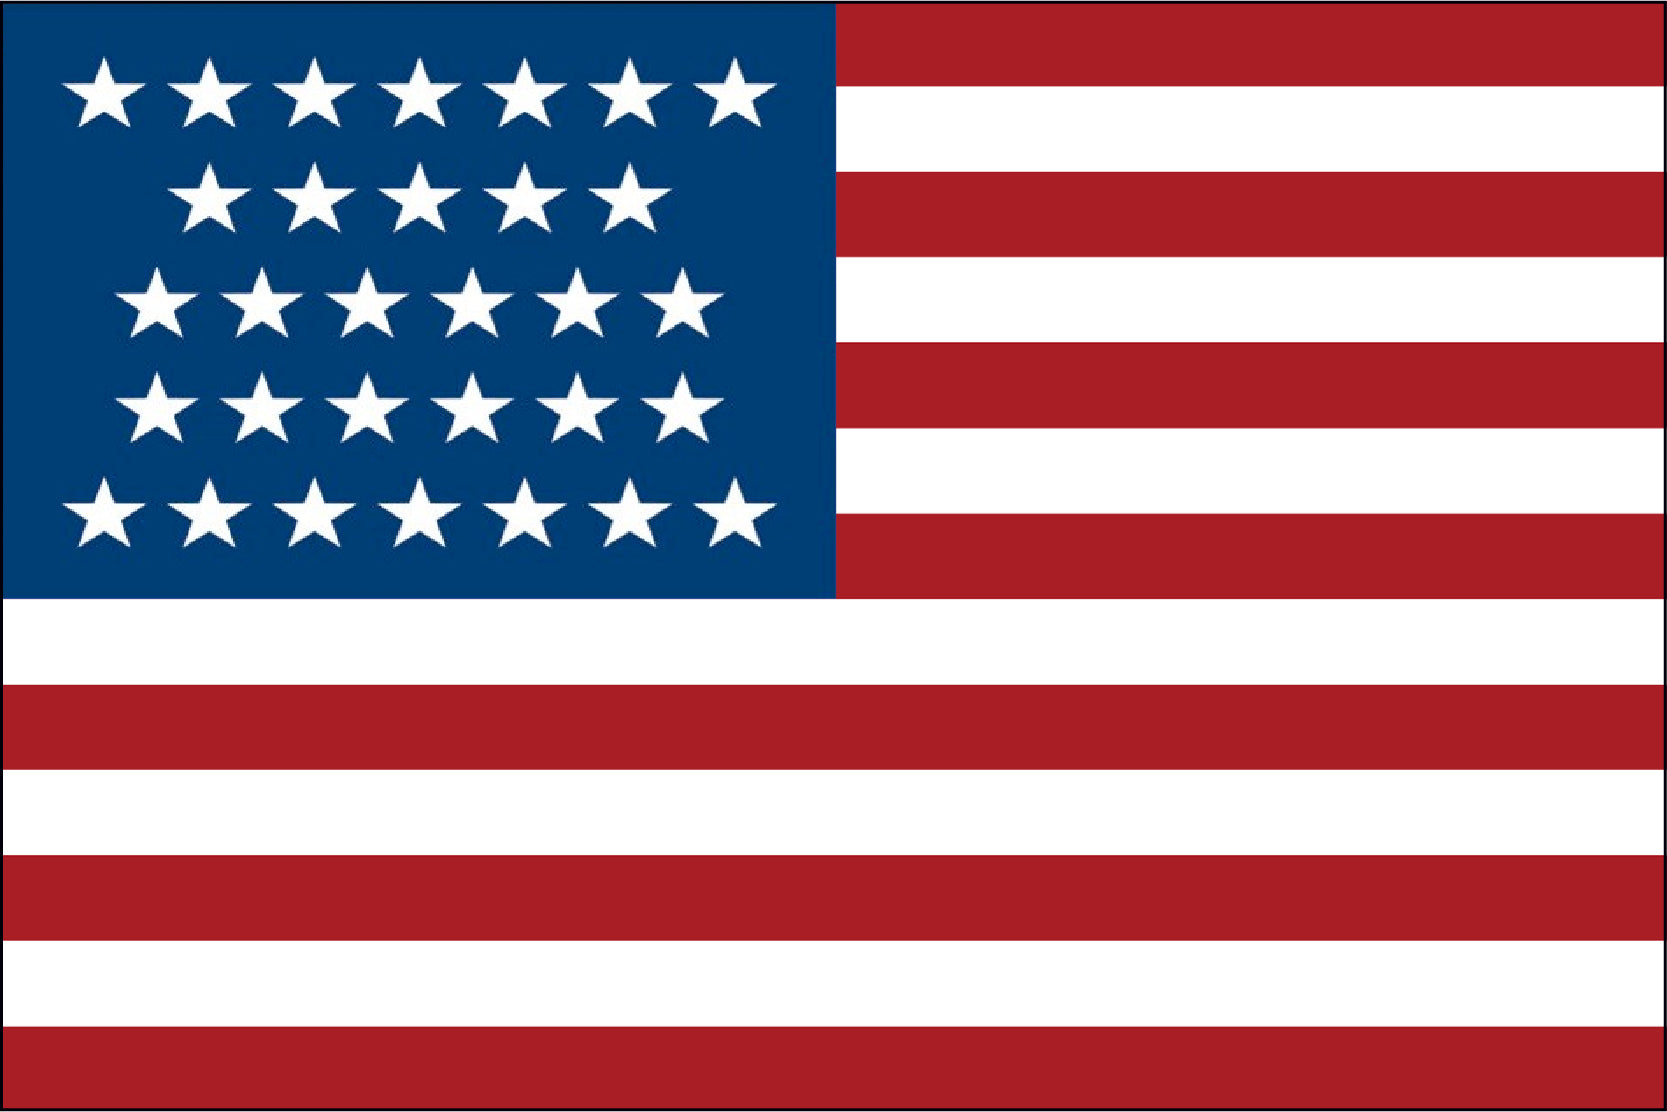 31 Star Old Glory Flag - LEAD TIMES ARE CURRENTLY RUNNING 6-8 WEEKS